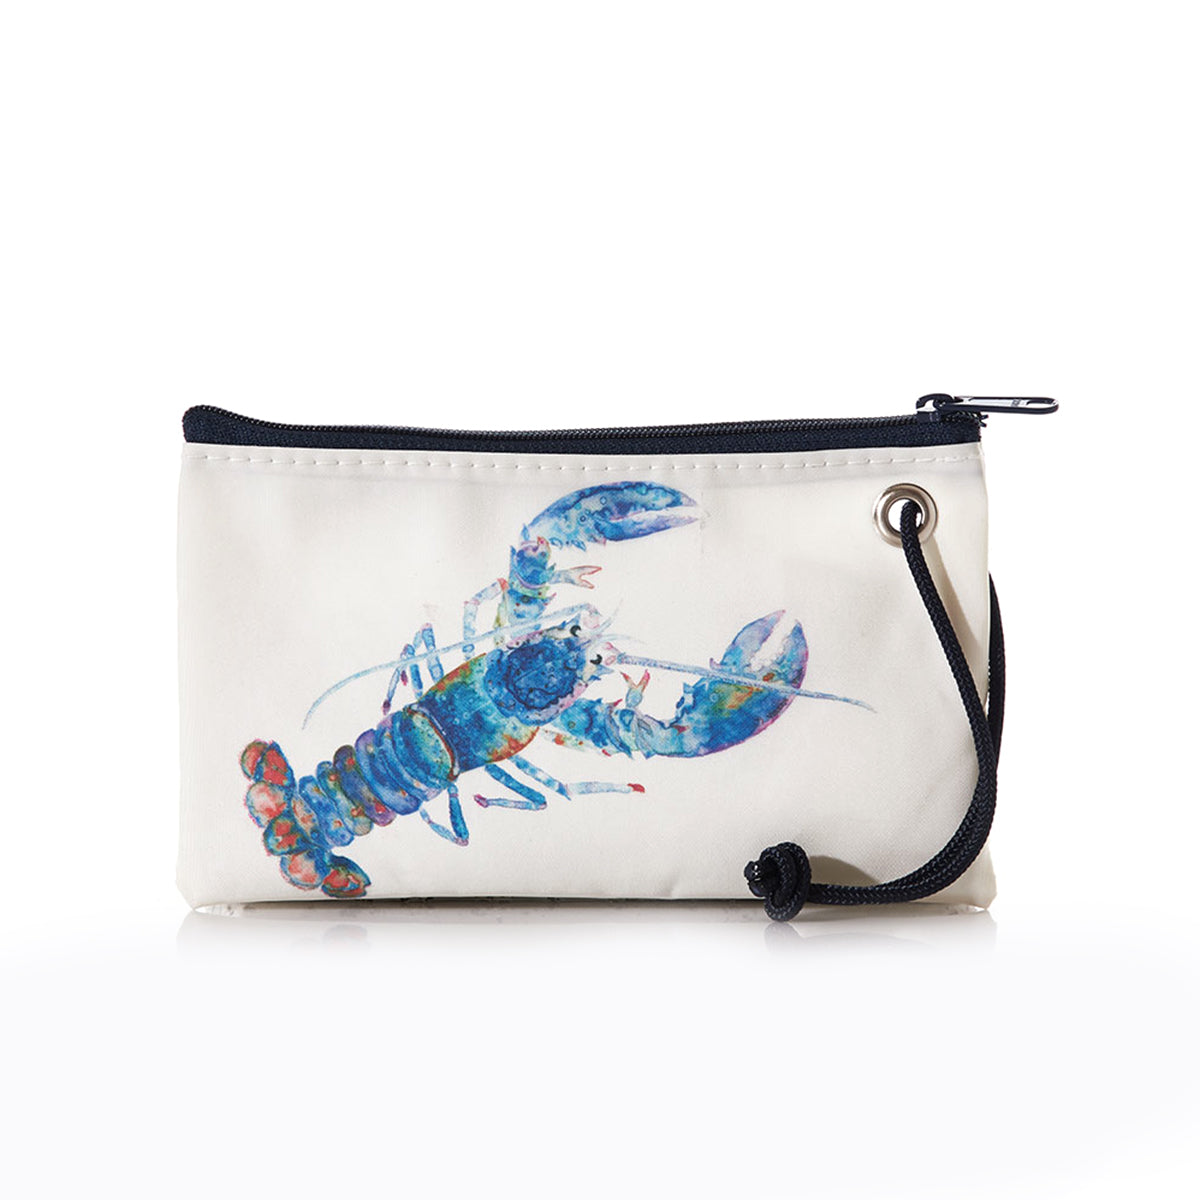 A Sea Bags Wristlet Multi Lobster, crafted from recycled sails, depicting a multi-lobster illustration, complete with a black zipper and a wrist strap.